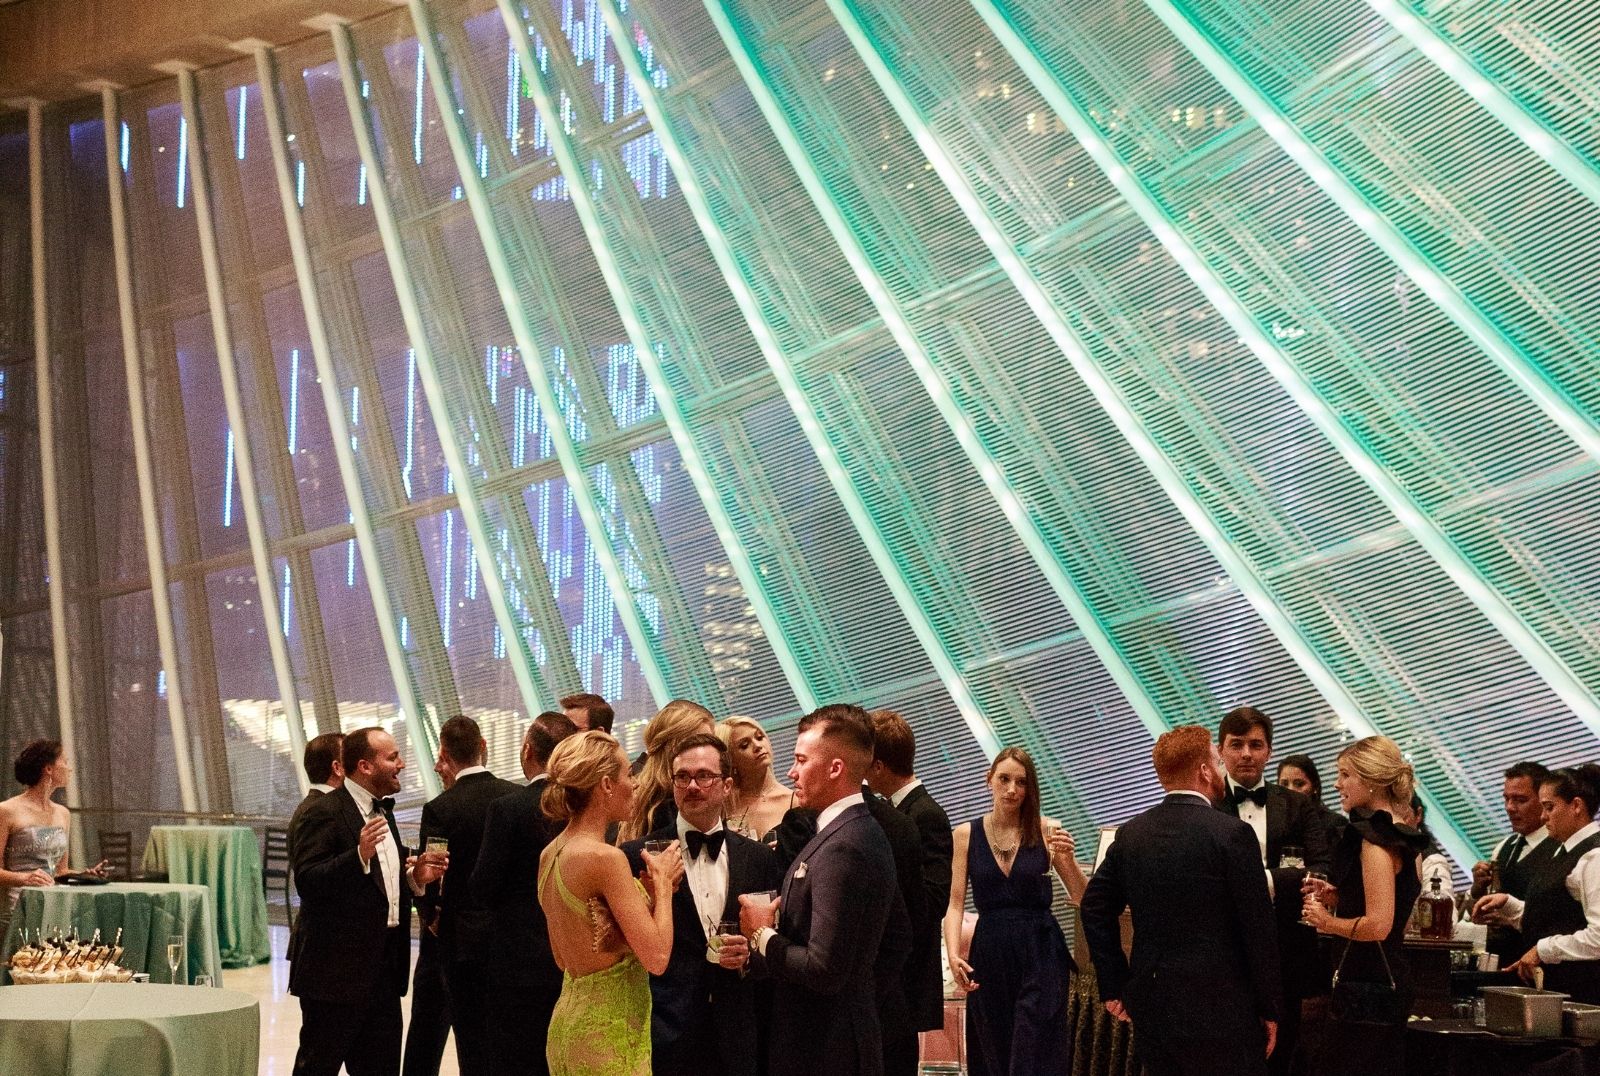 DSO Gala guests mingling at a VIP reception on the east loge of the Meyerson